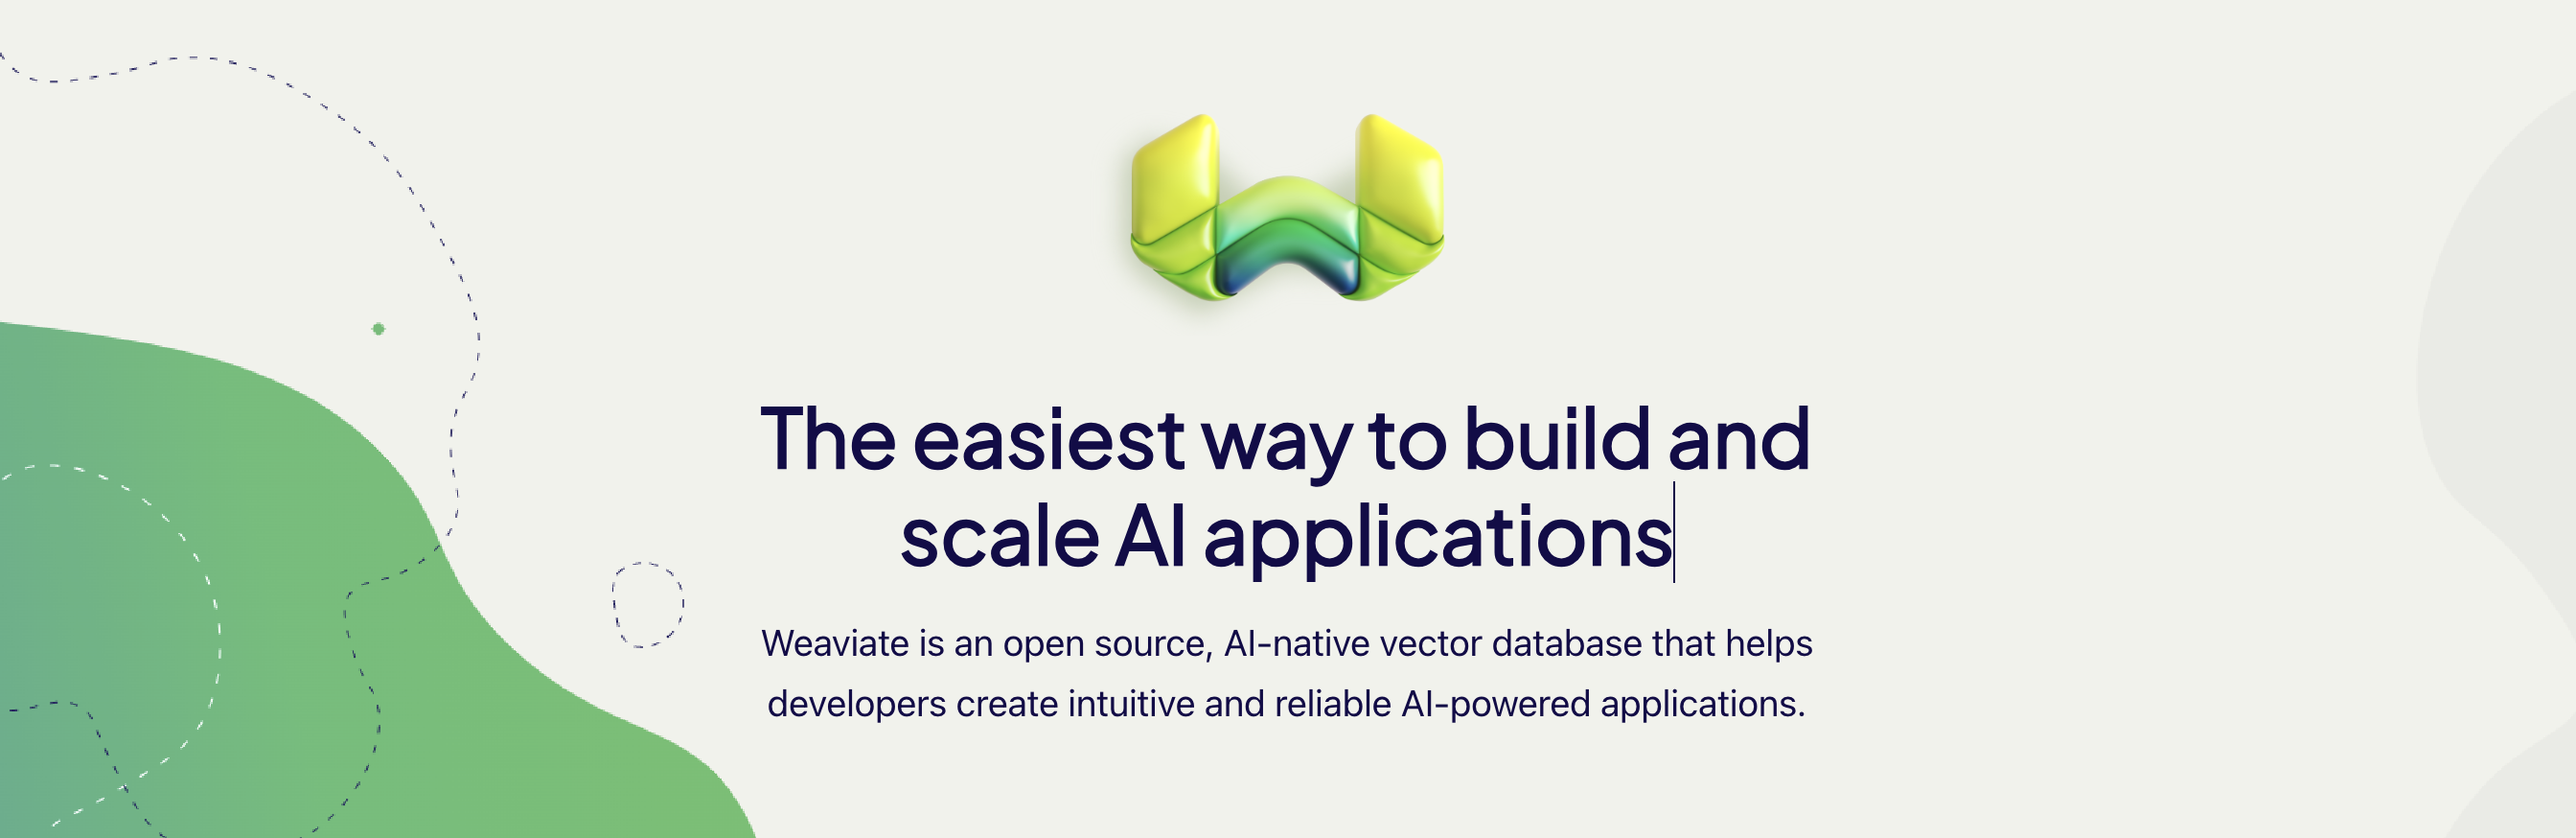 weaviate-easiest-way-to-build-ai-apps